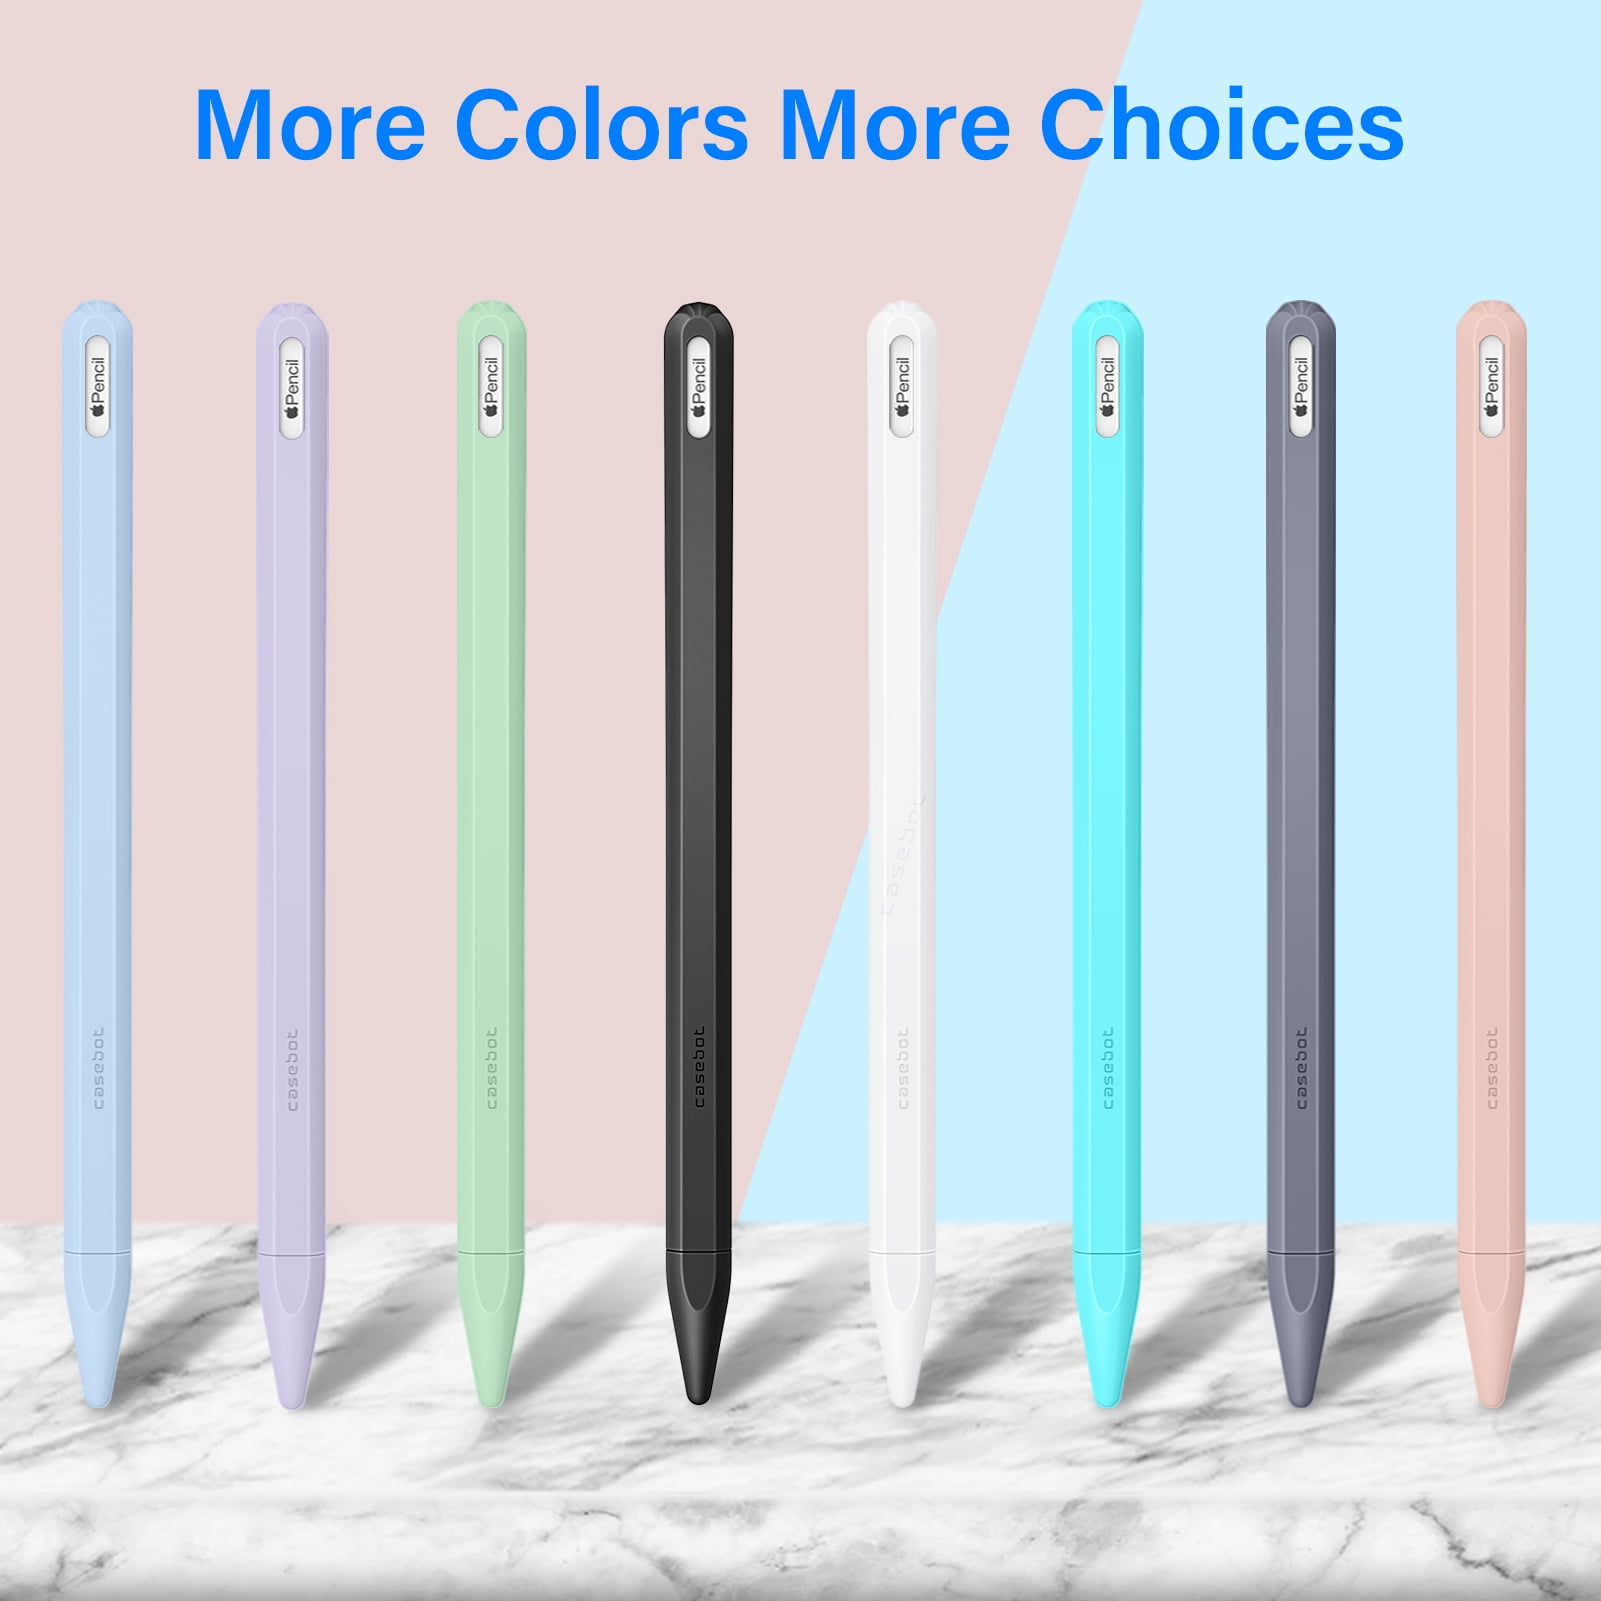 Apple Pencil (2nd Generation) Review